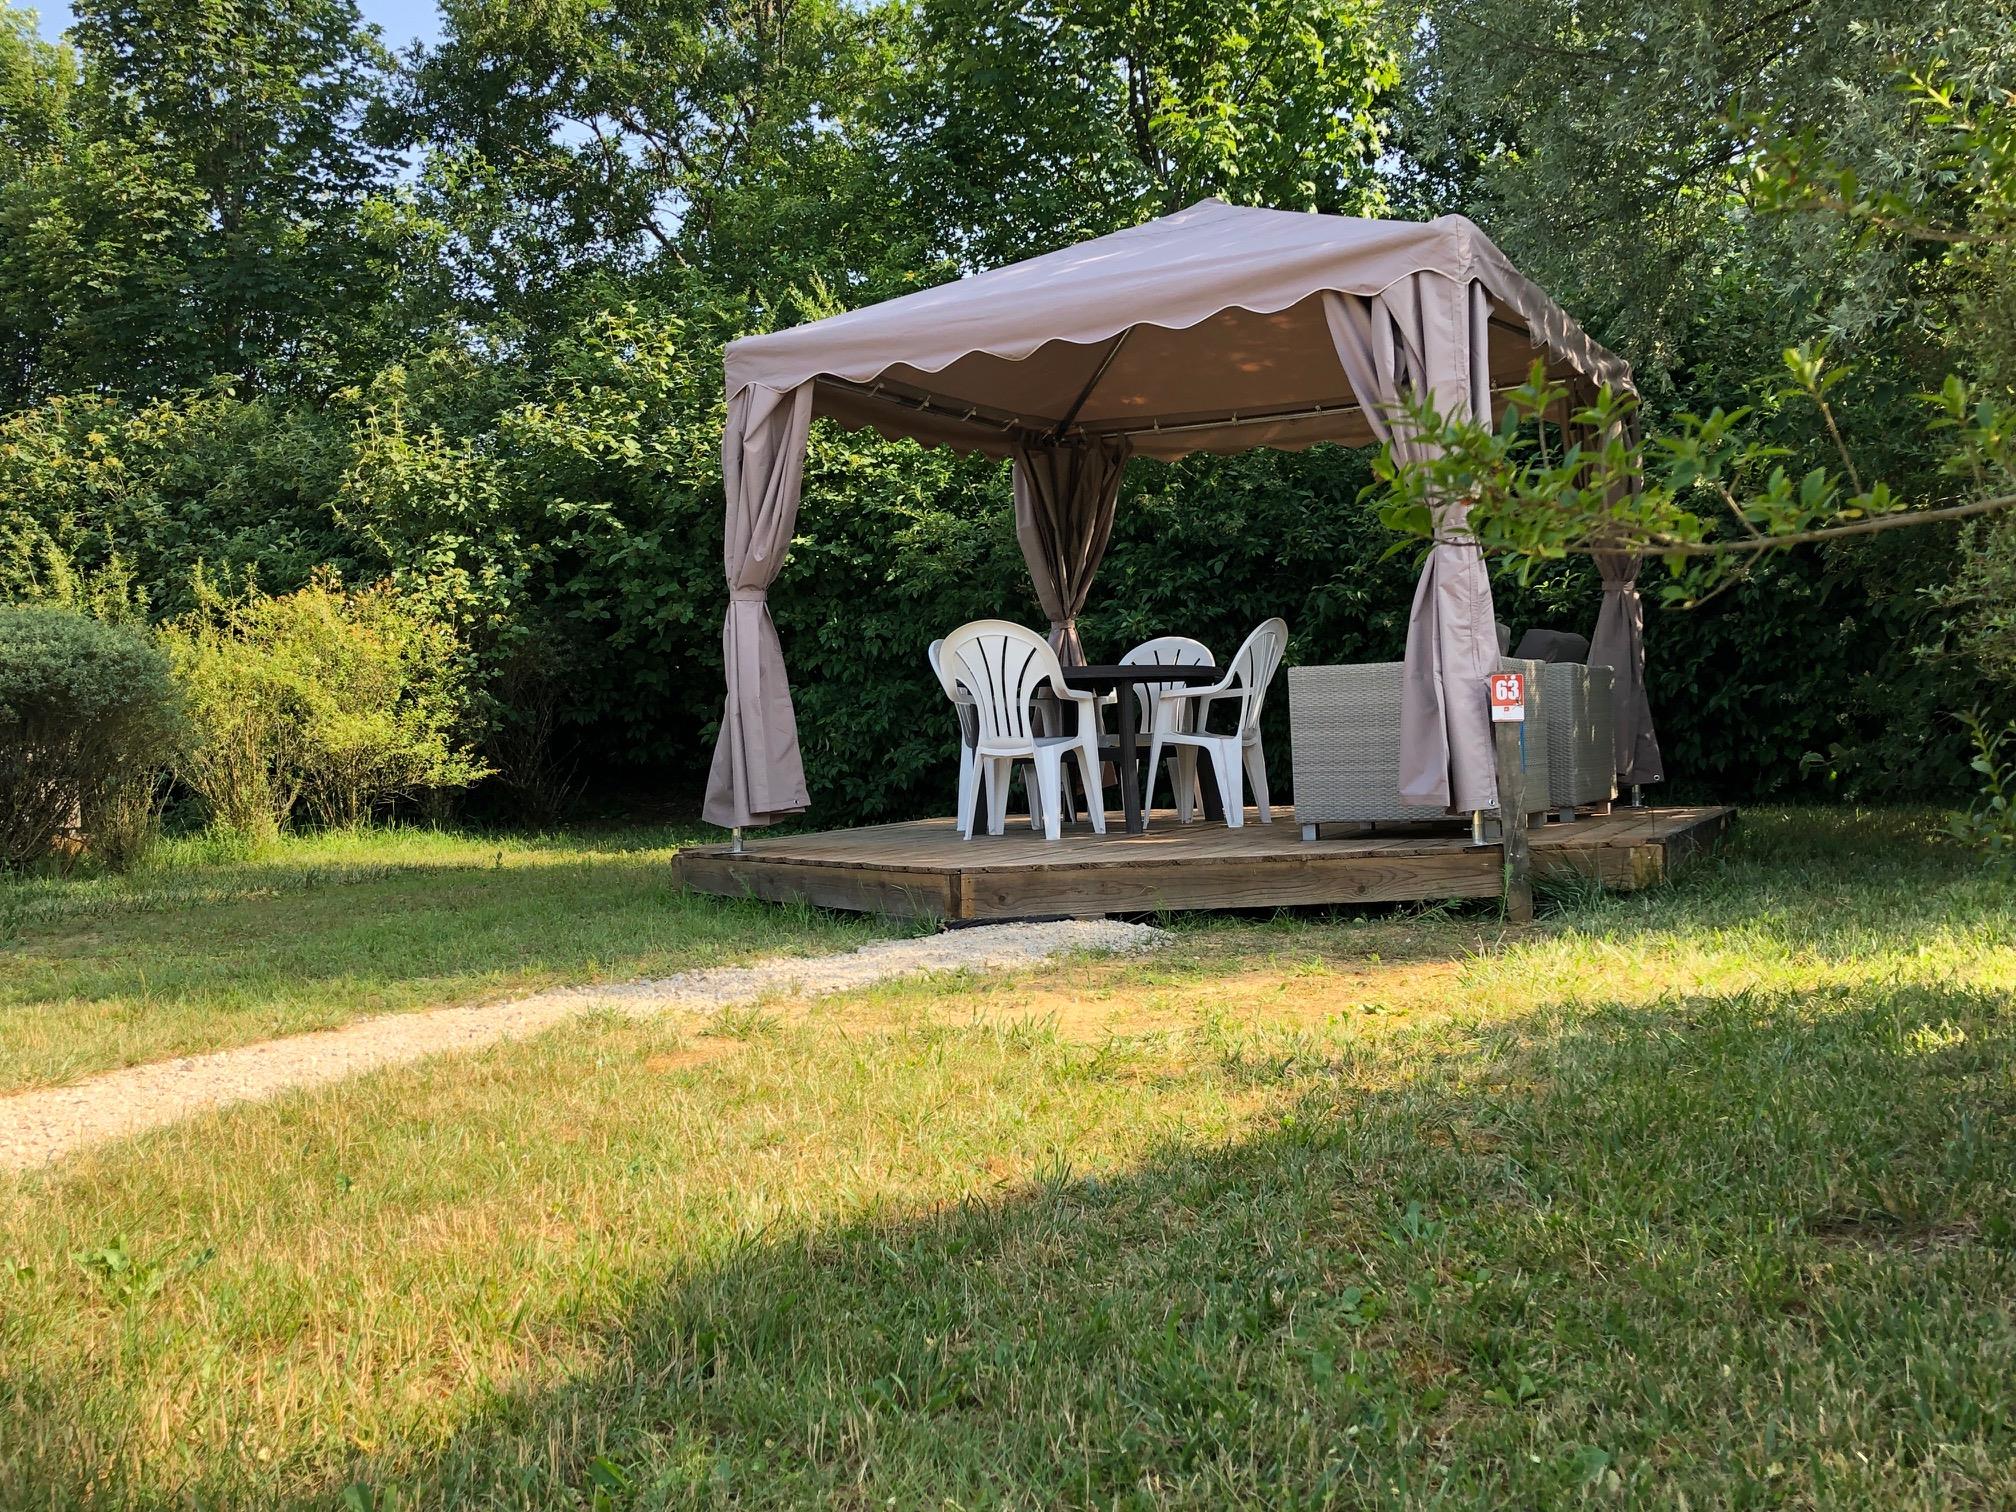 Pitch - Package Plénitude : 2 People + Car + Electricity  + Covered Terrace + 4 Garden Chairs + 2 Relax Chairs - Camping Ecologique LA ROCHE D'ULLY